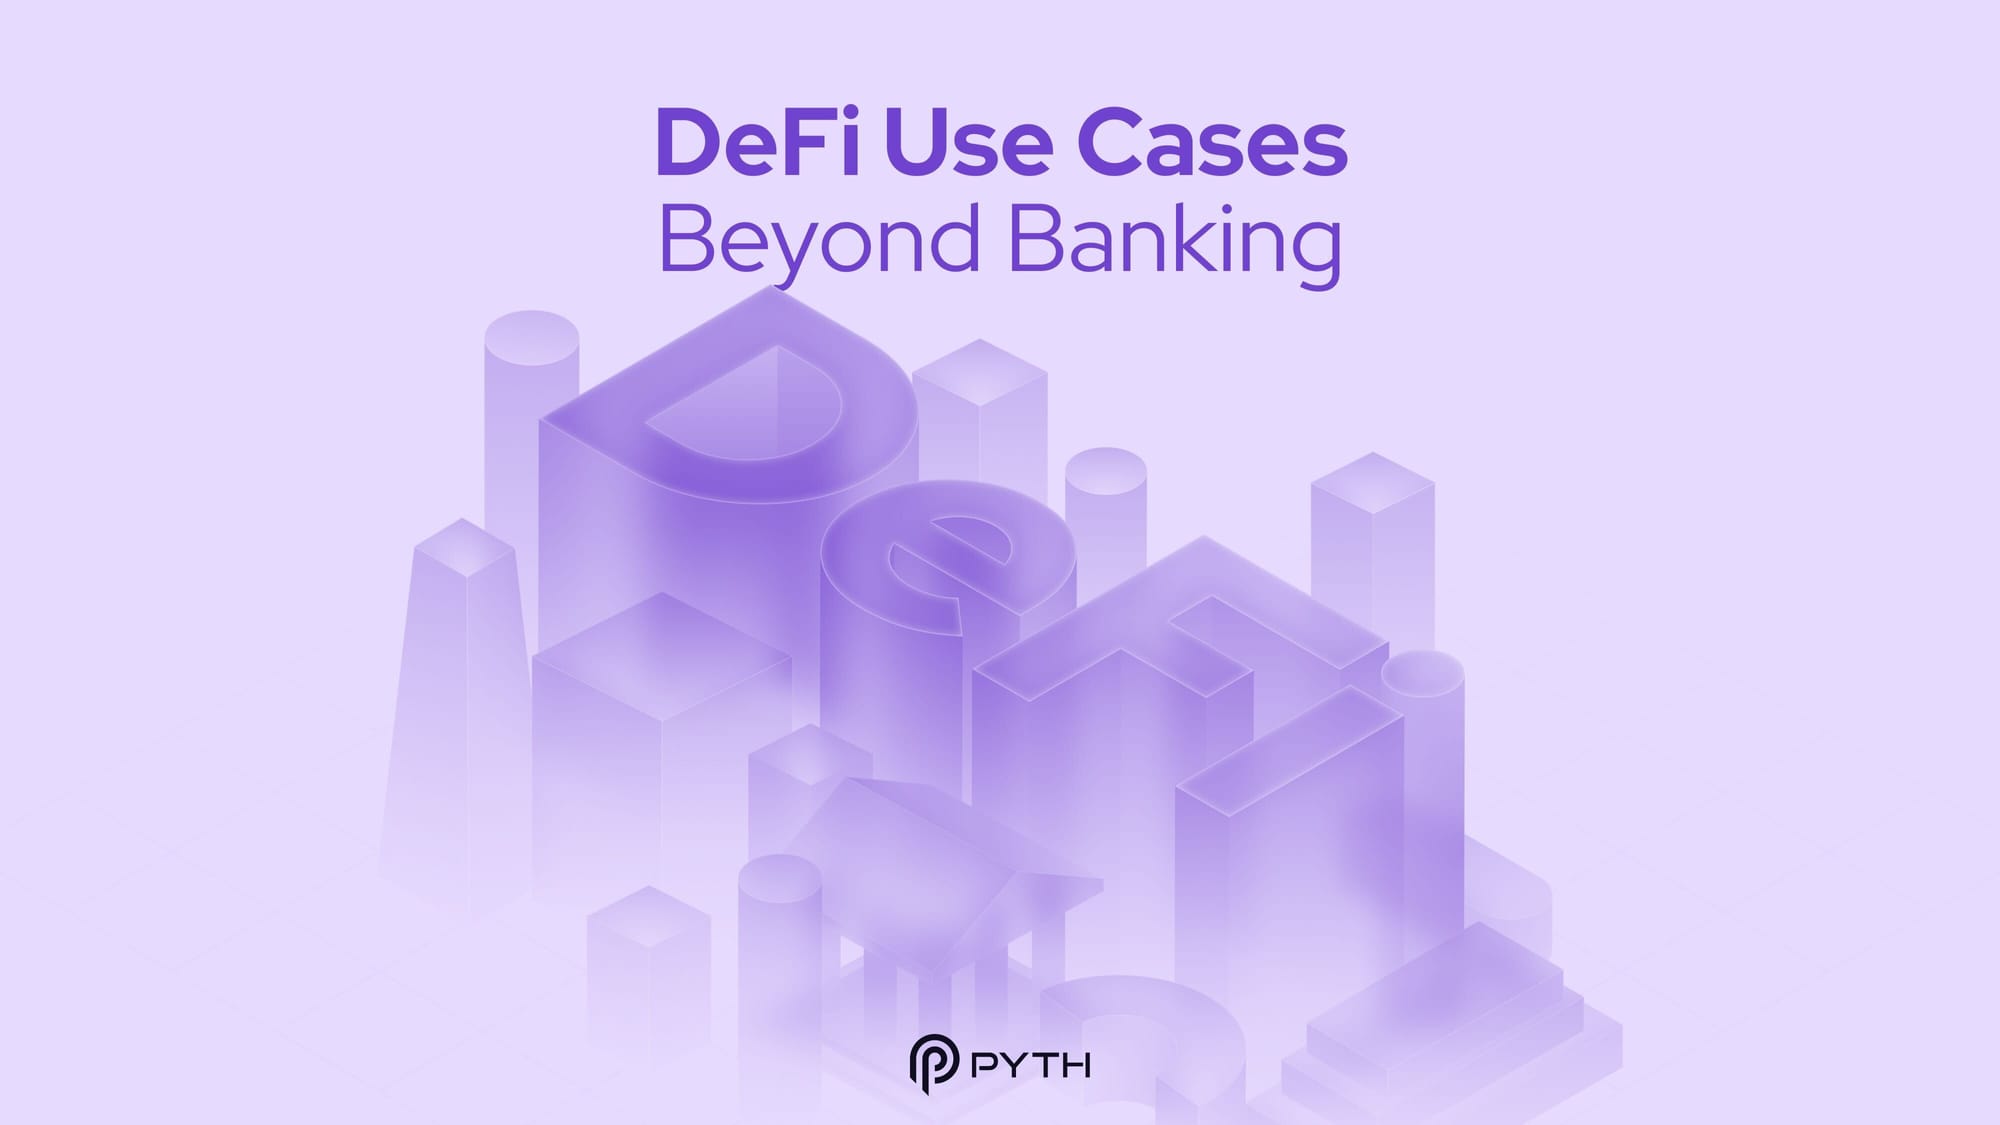 DeFi Use Cases Beyond Banking: Real Estate, Gaming, and More